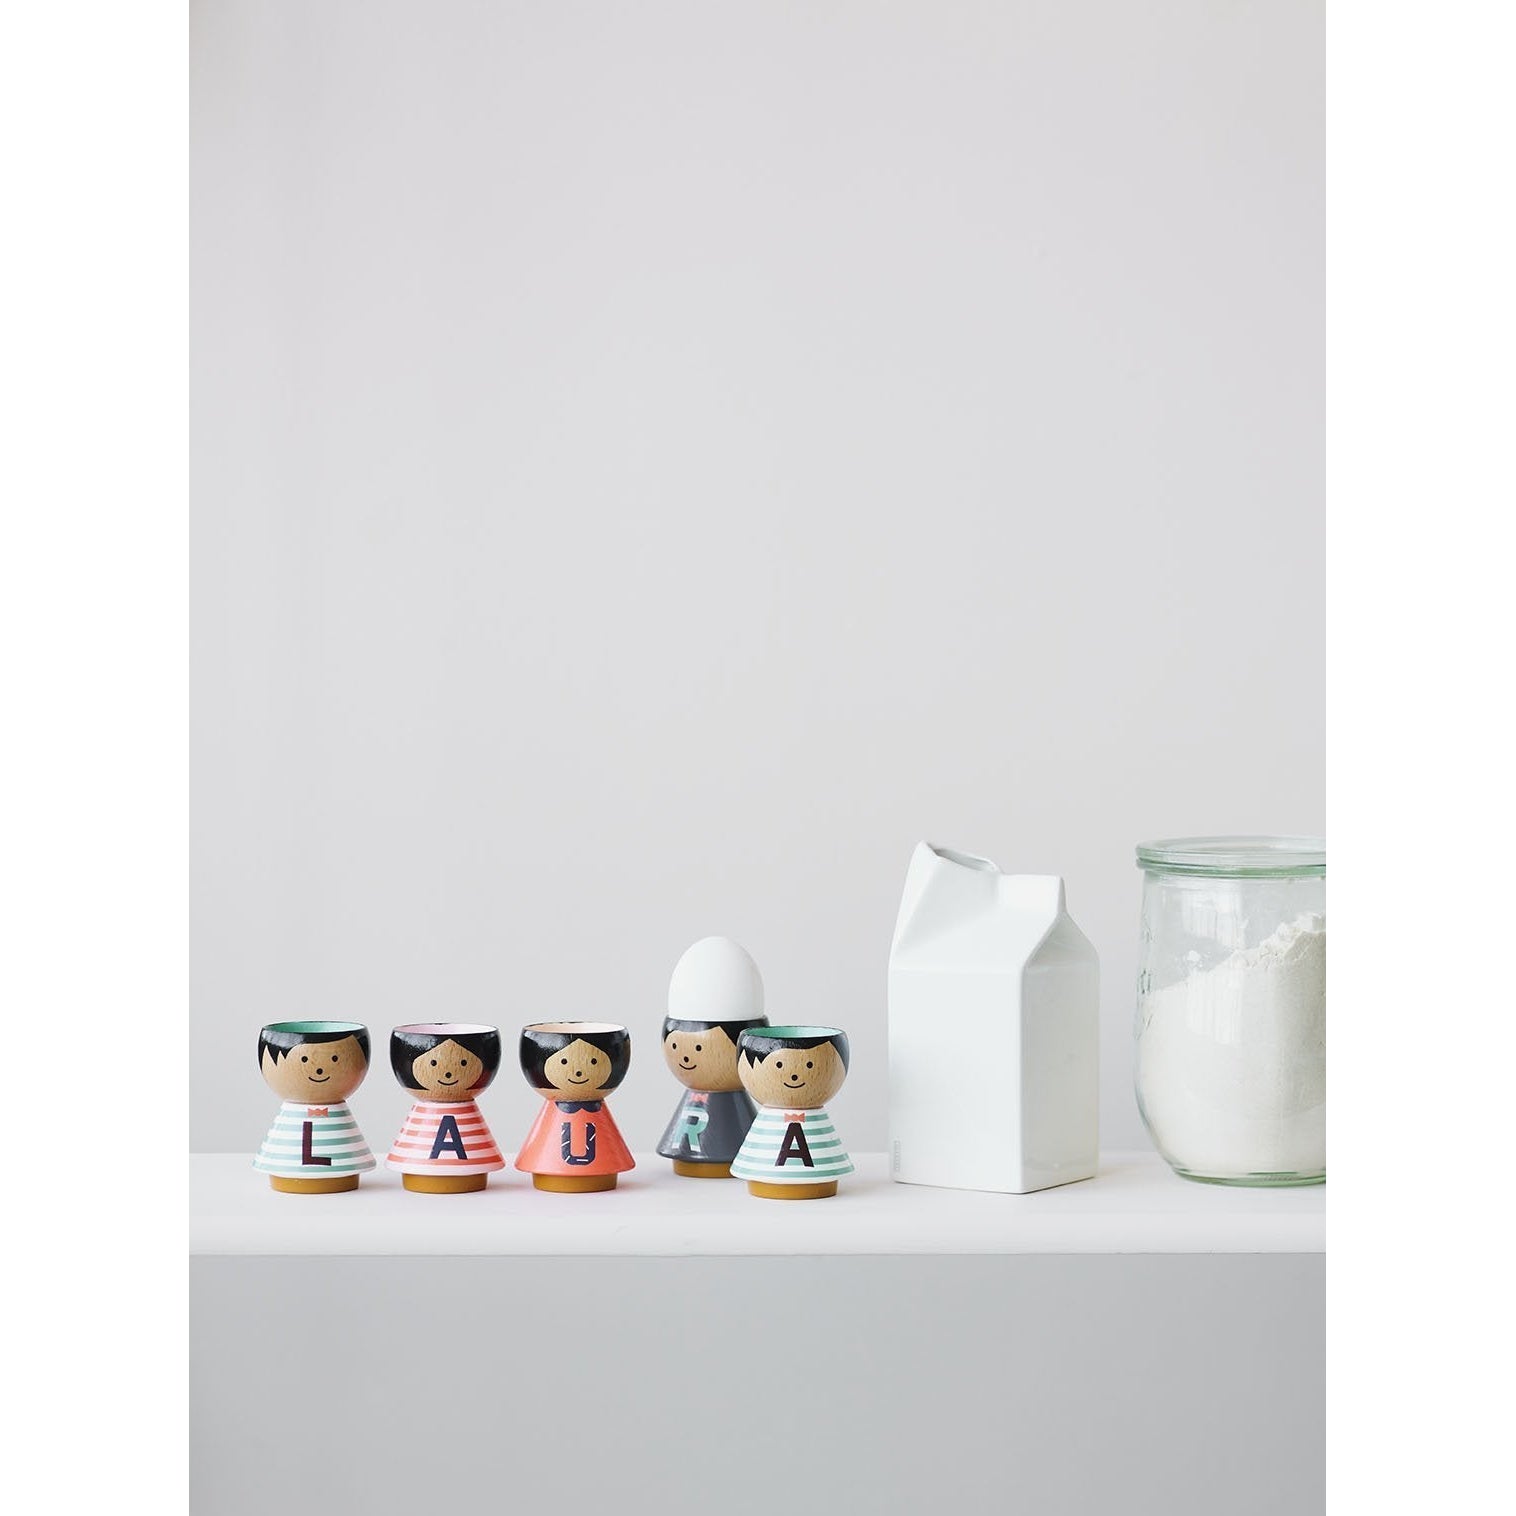 Lucie Kaas Table People A Z Egg Cup, Girl O